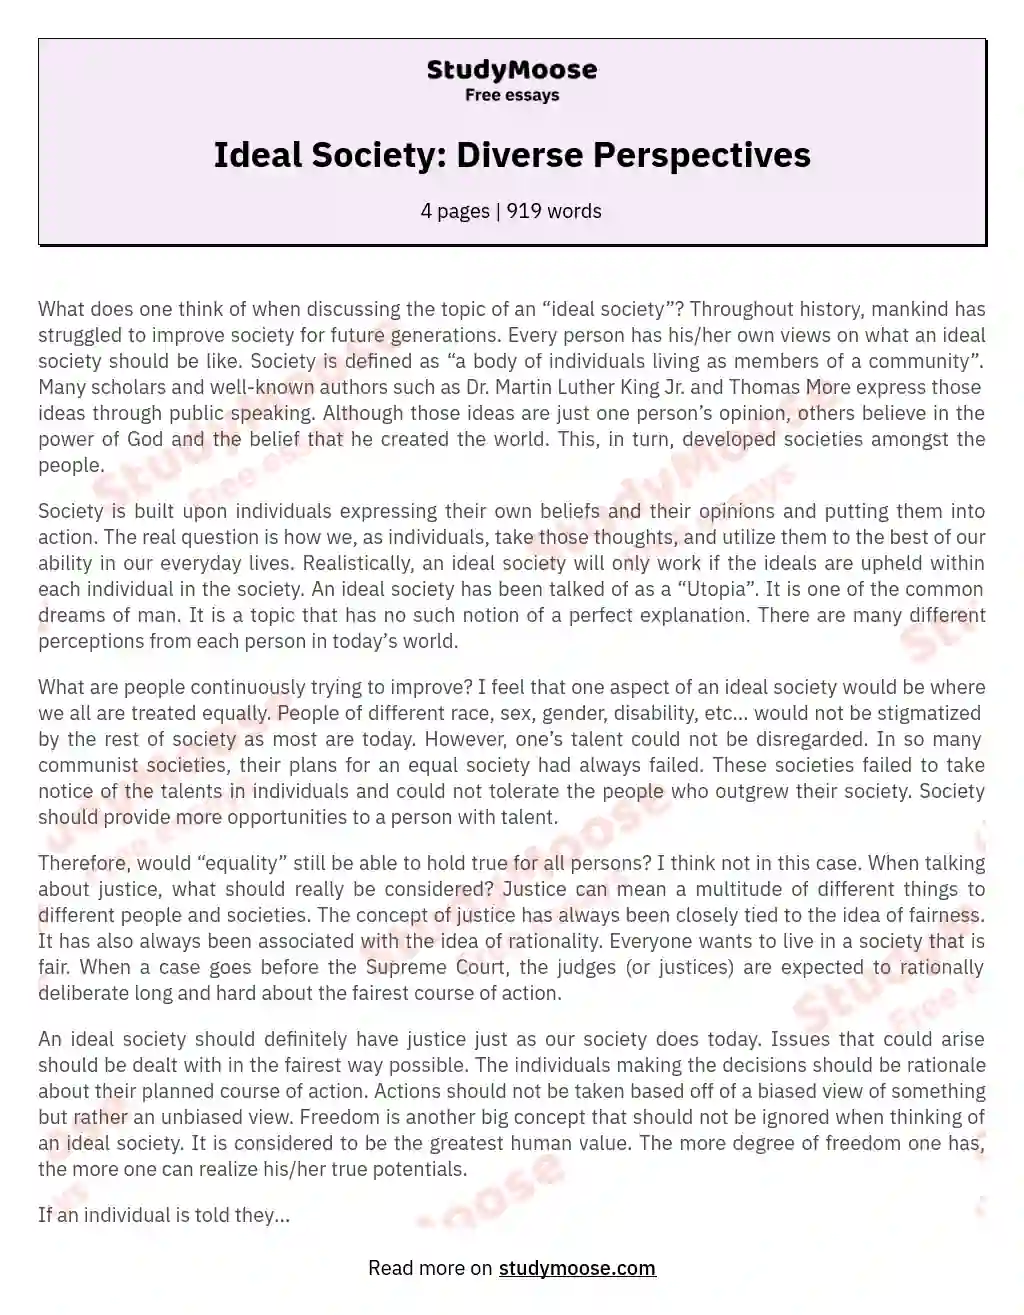 Ideal Society: Diverse Perspectives essay